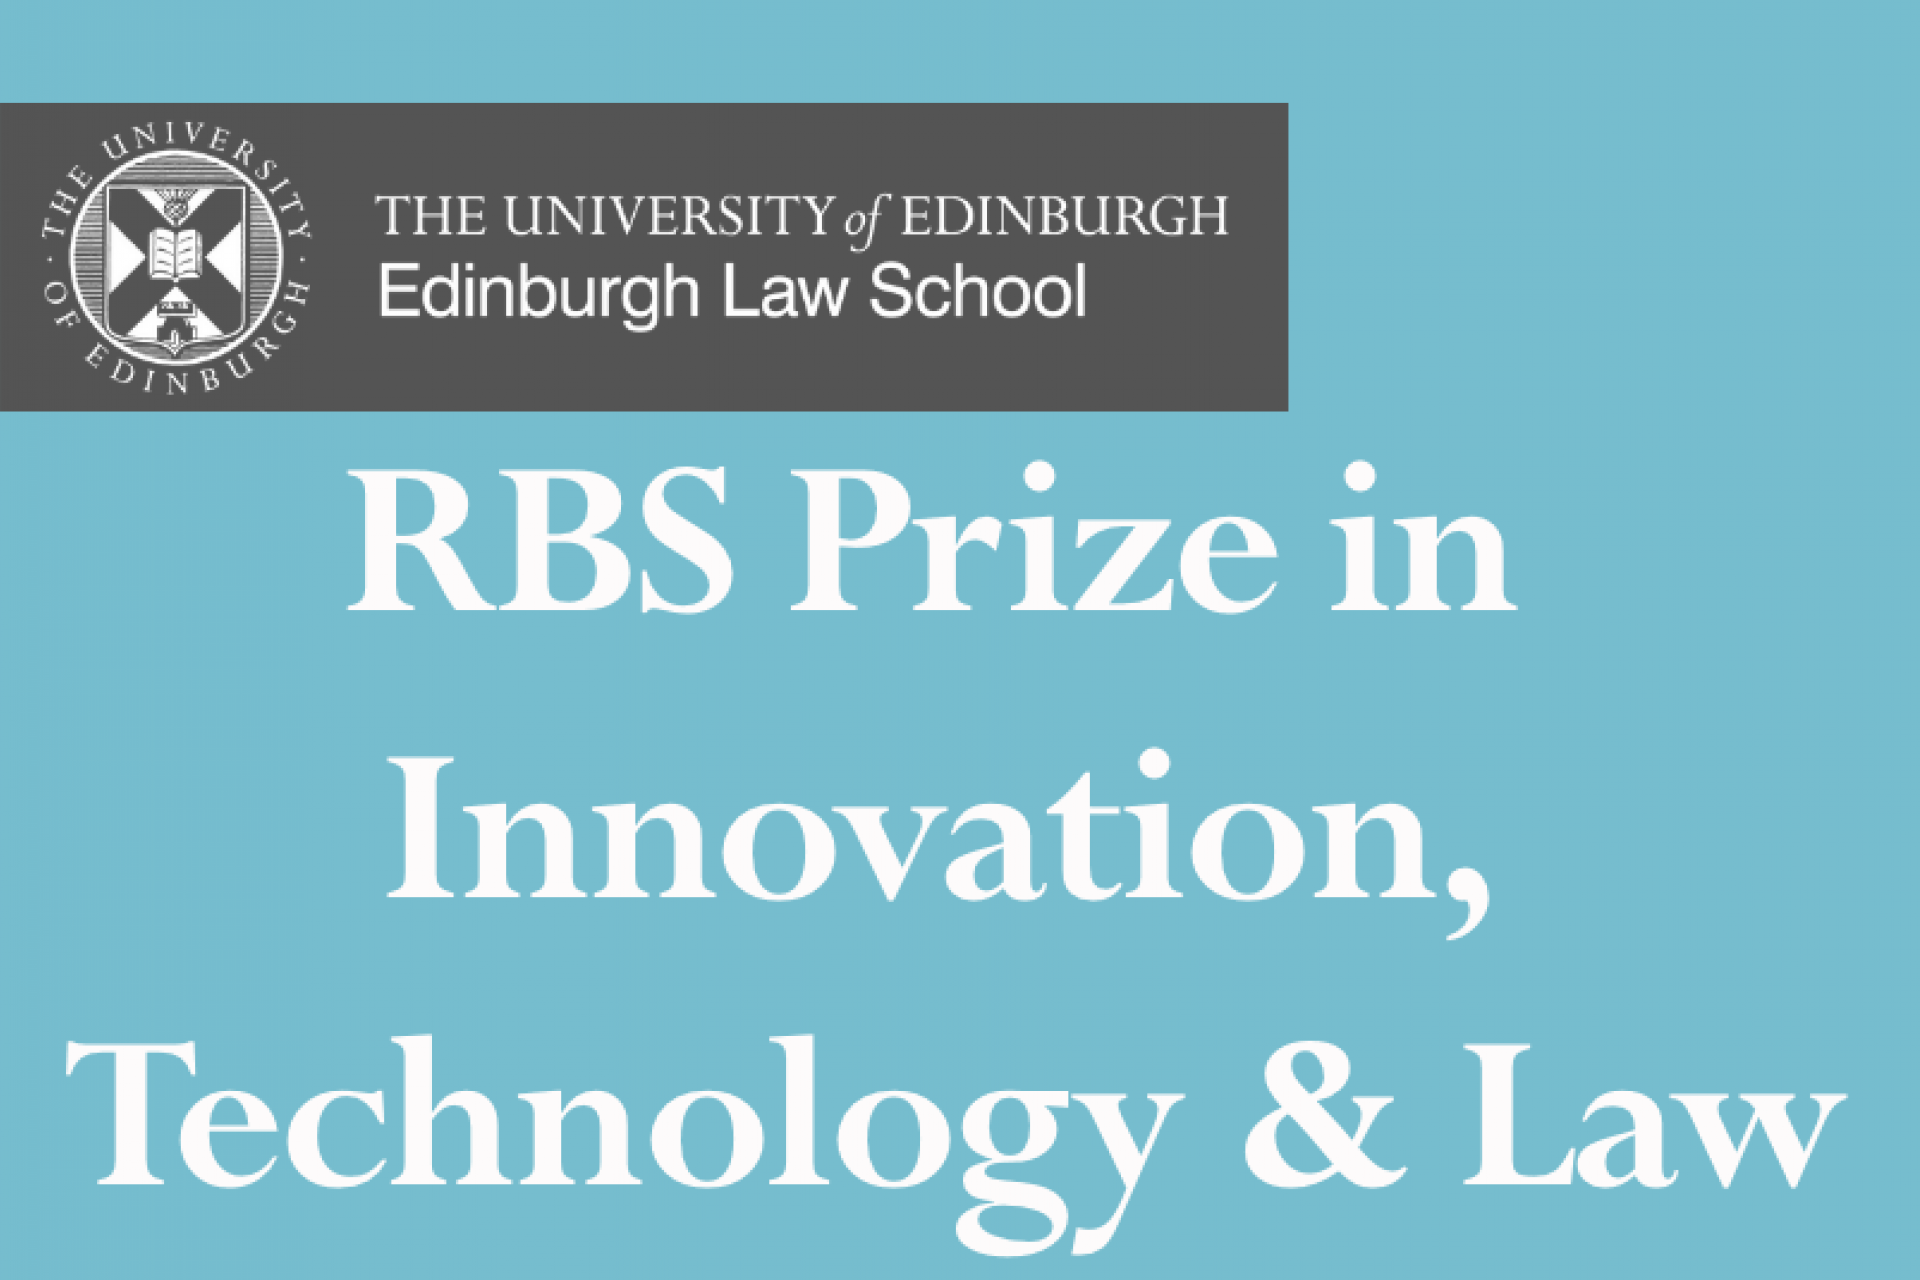 RBS Prize in Innovation, Technology & Law